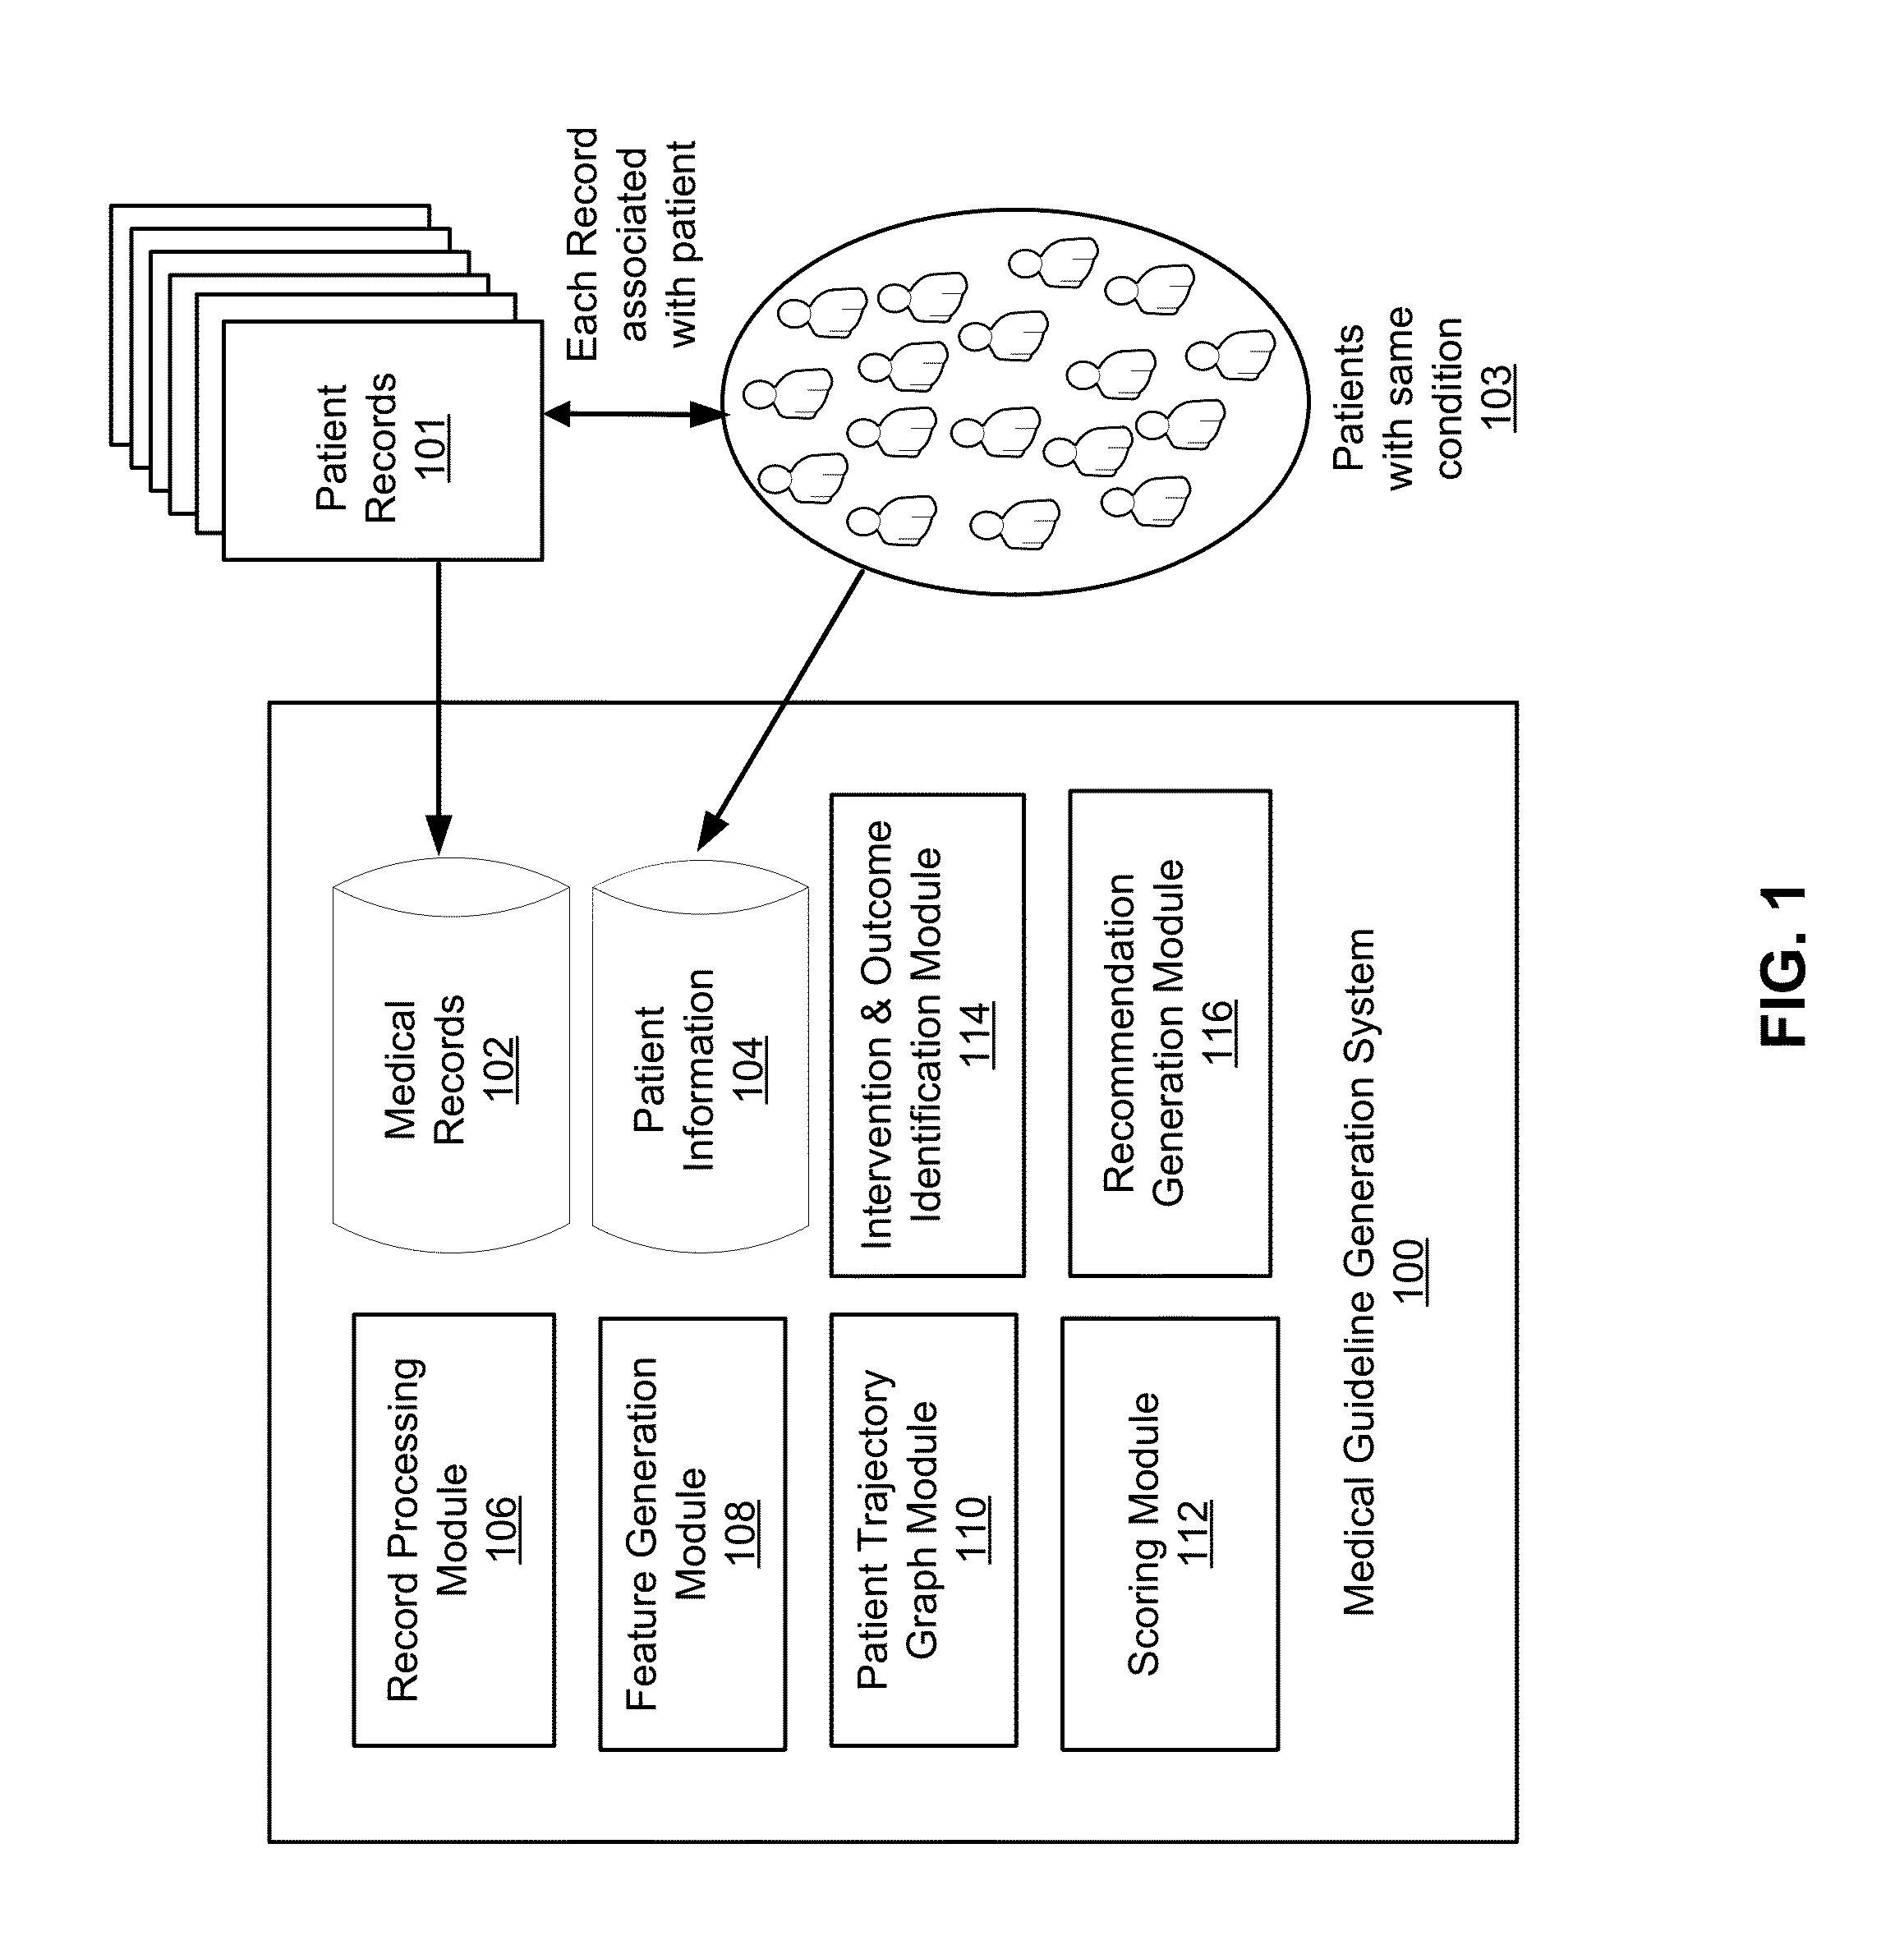 System for Generating and Updating Treatment Guidelines and Estimating Effect Size of Treatment Steps